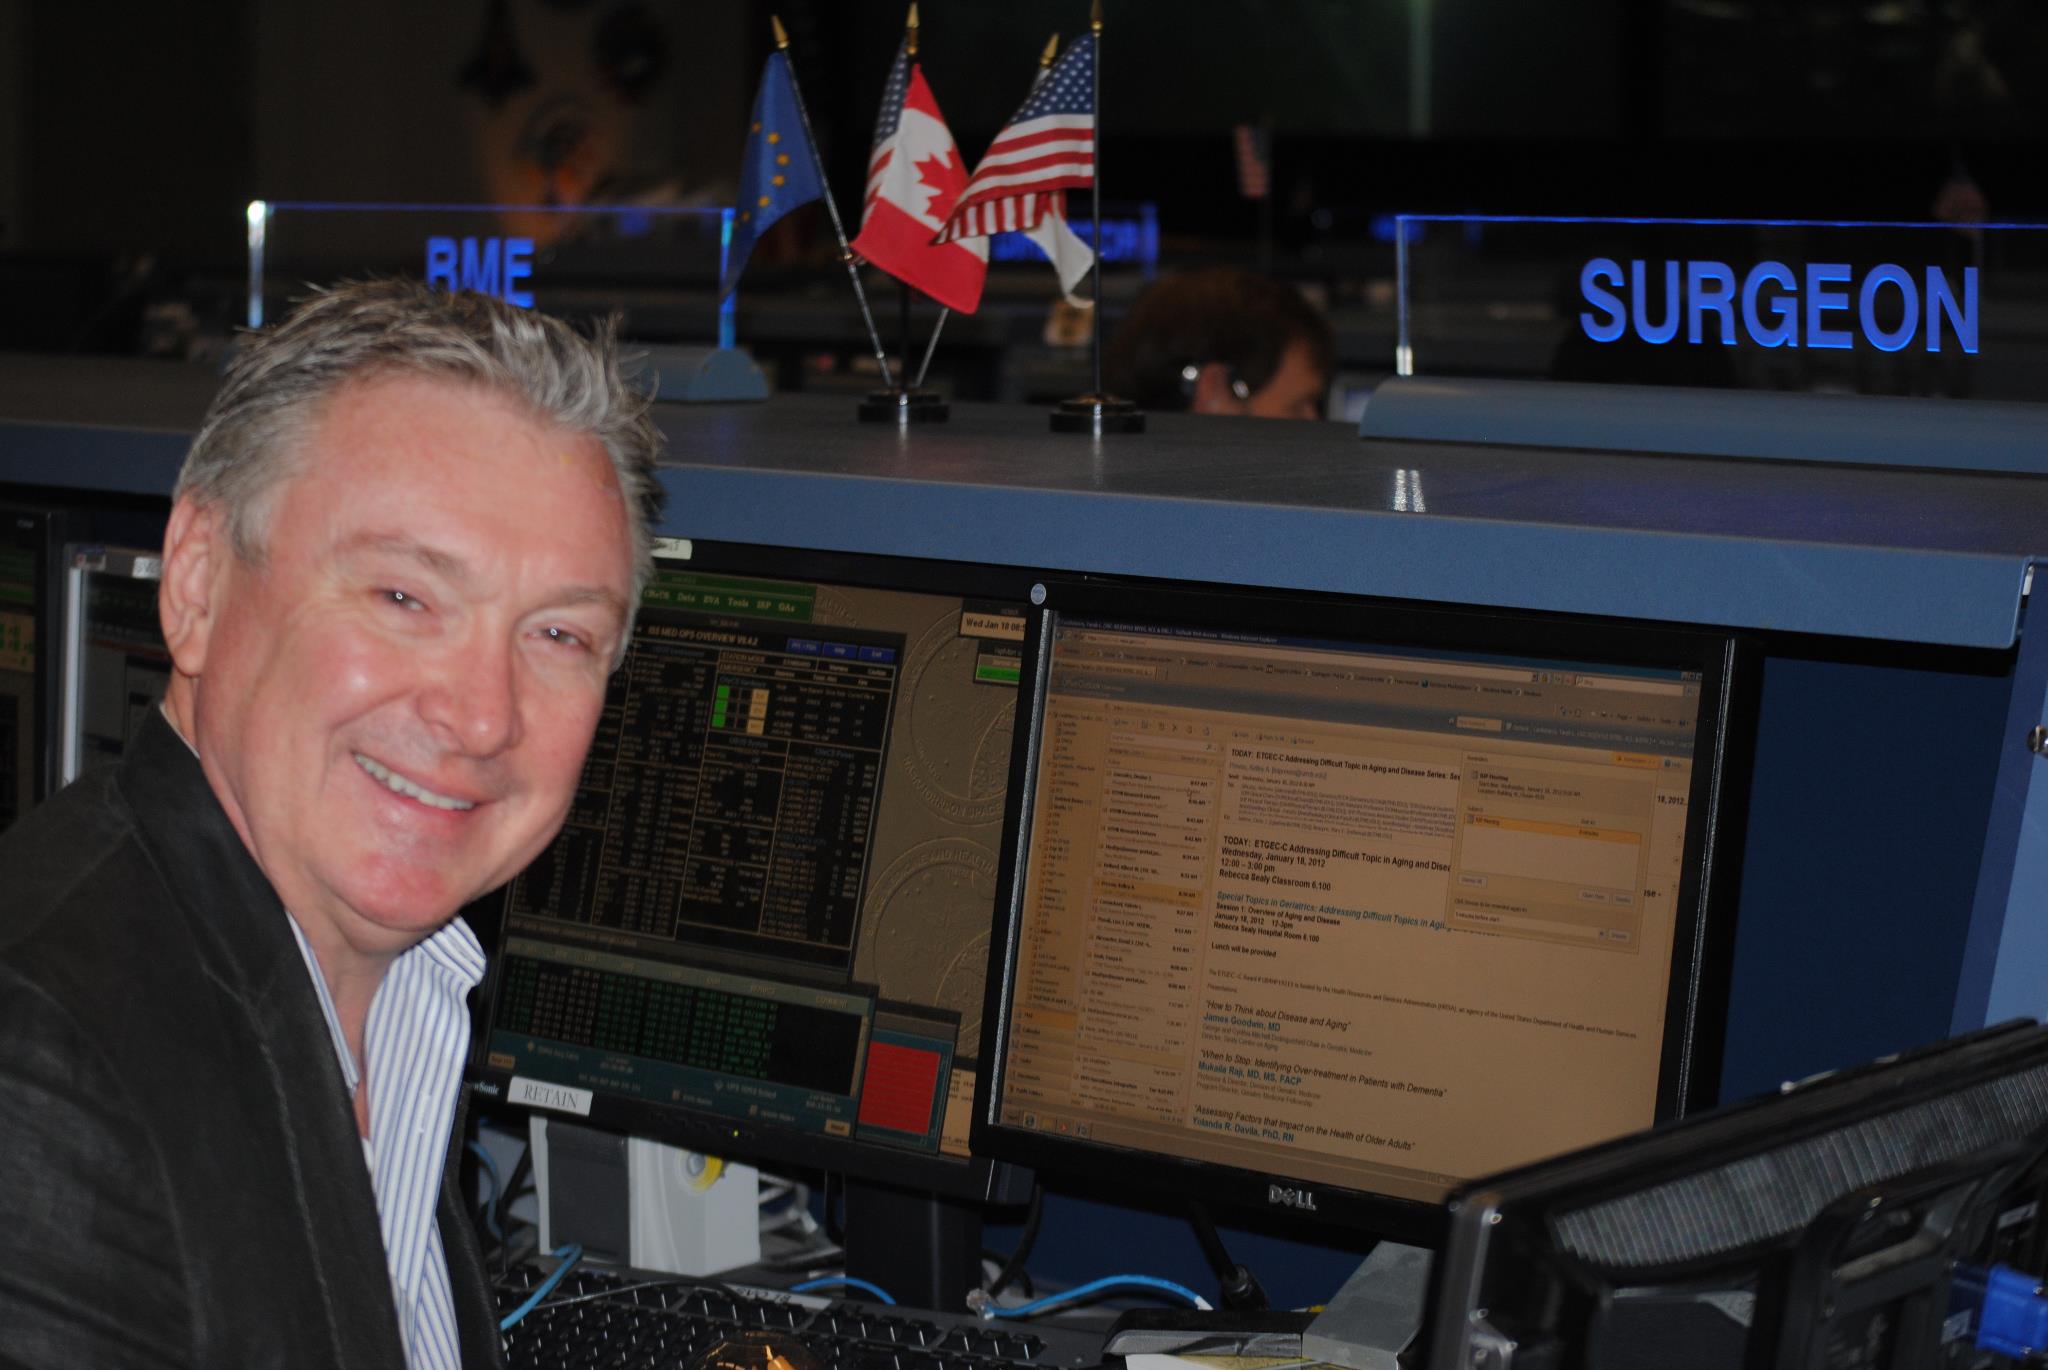 Dr. Moomaw at mission control